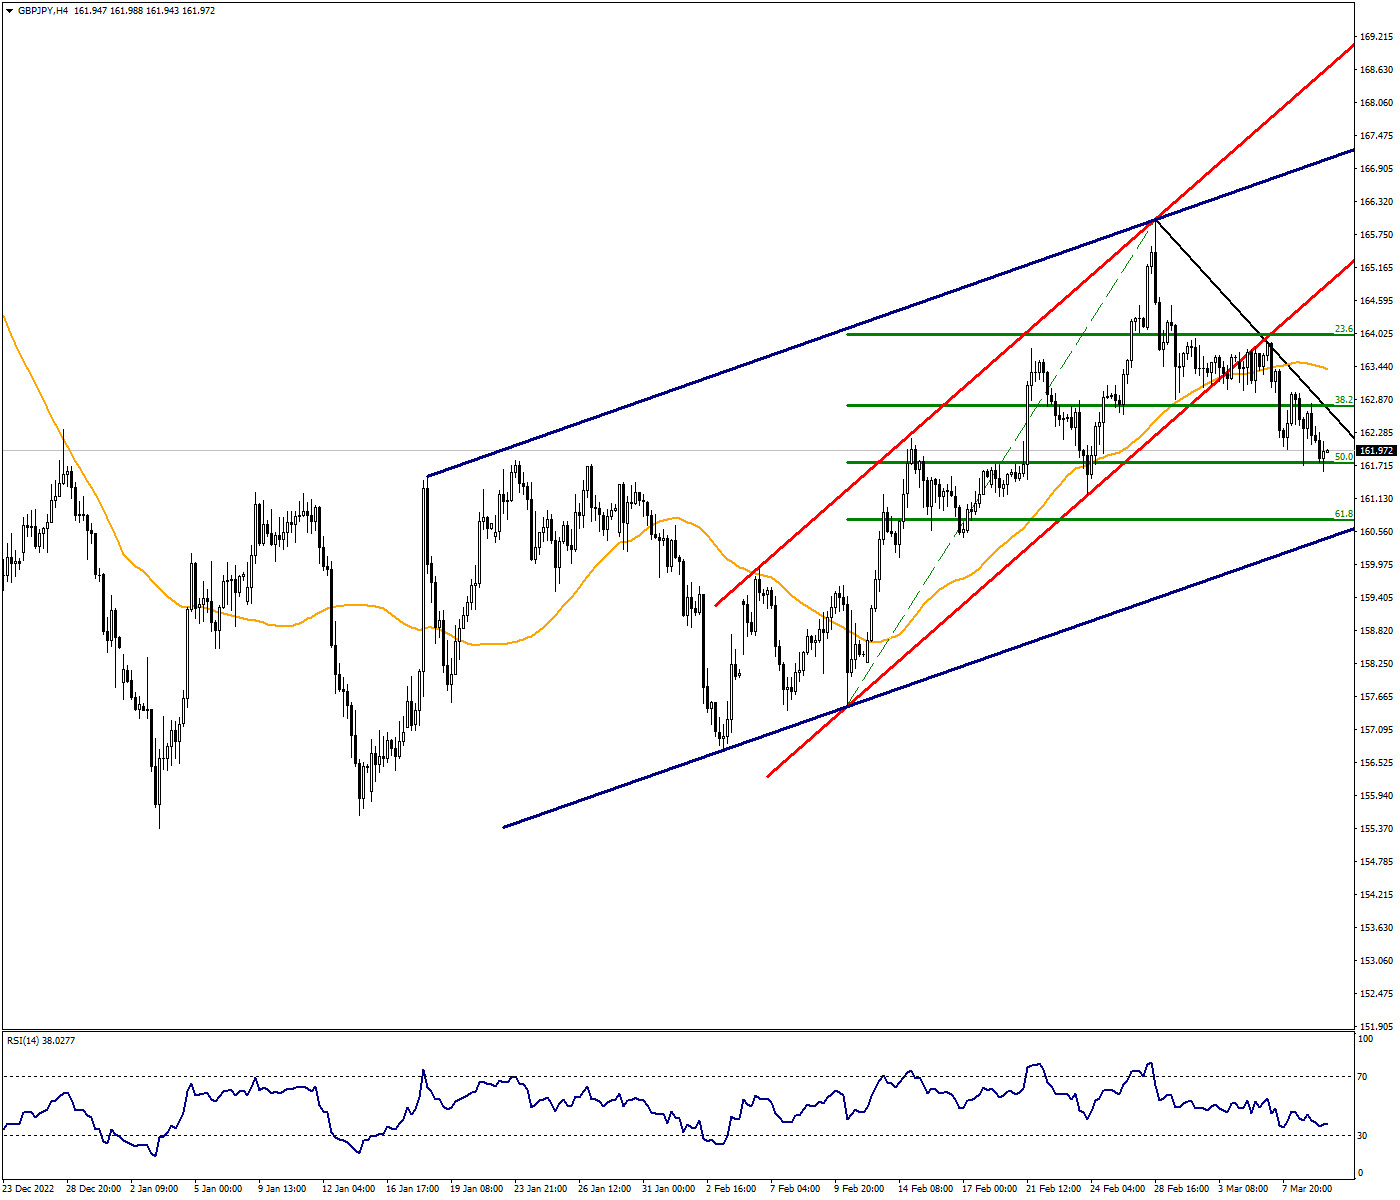 GBPJPY is Pressured Under Downtrend